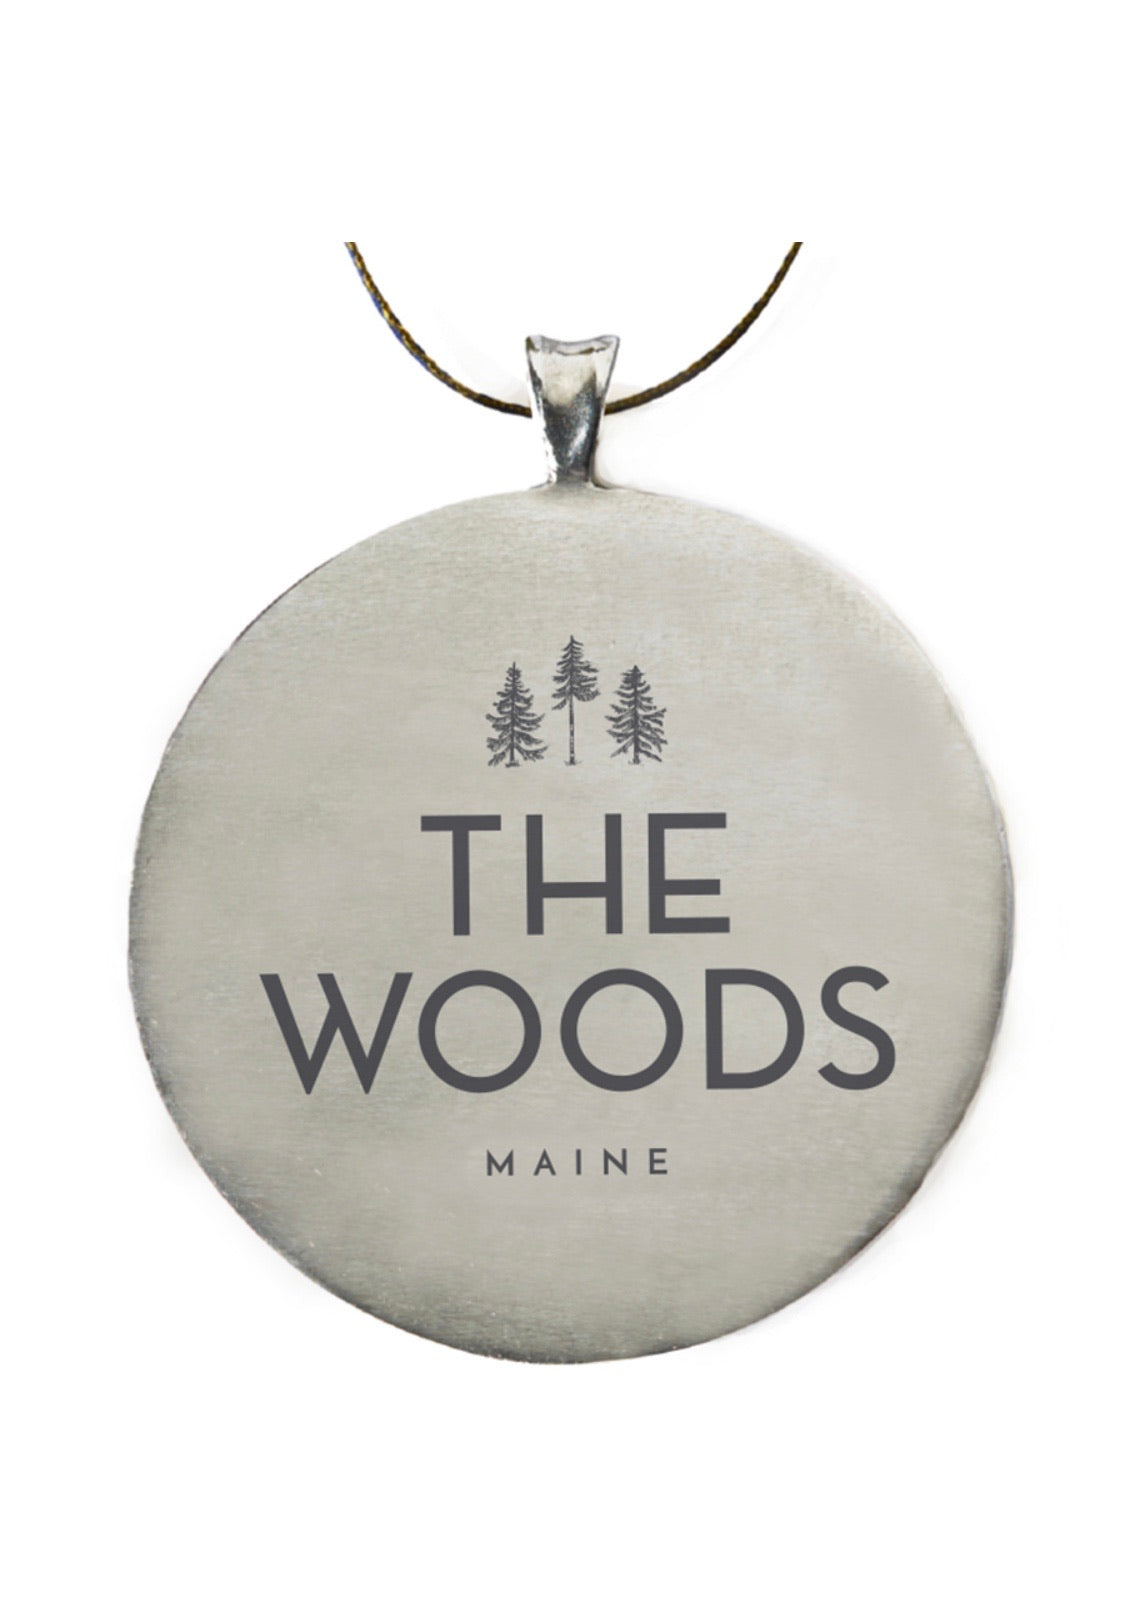 The Woods Maine® Loon Keepsake Ornament by CHART Metalworks